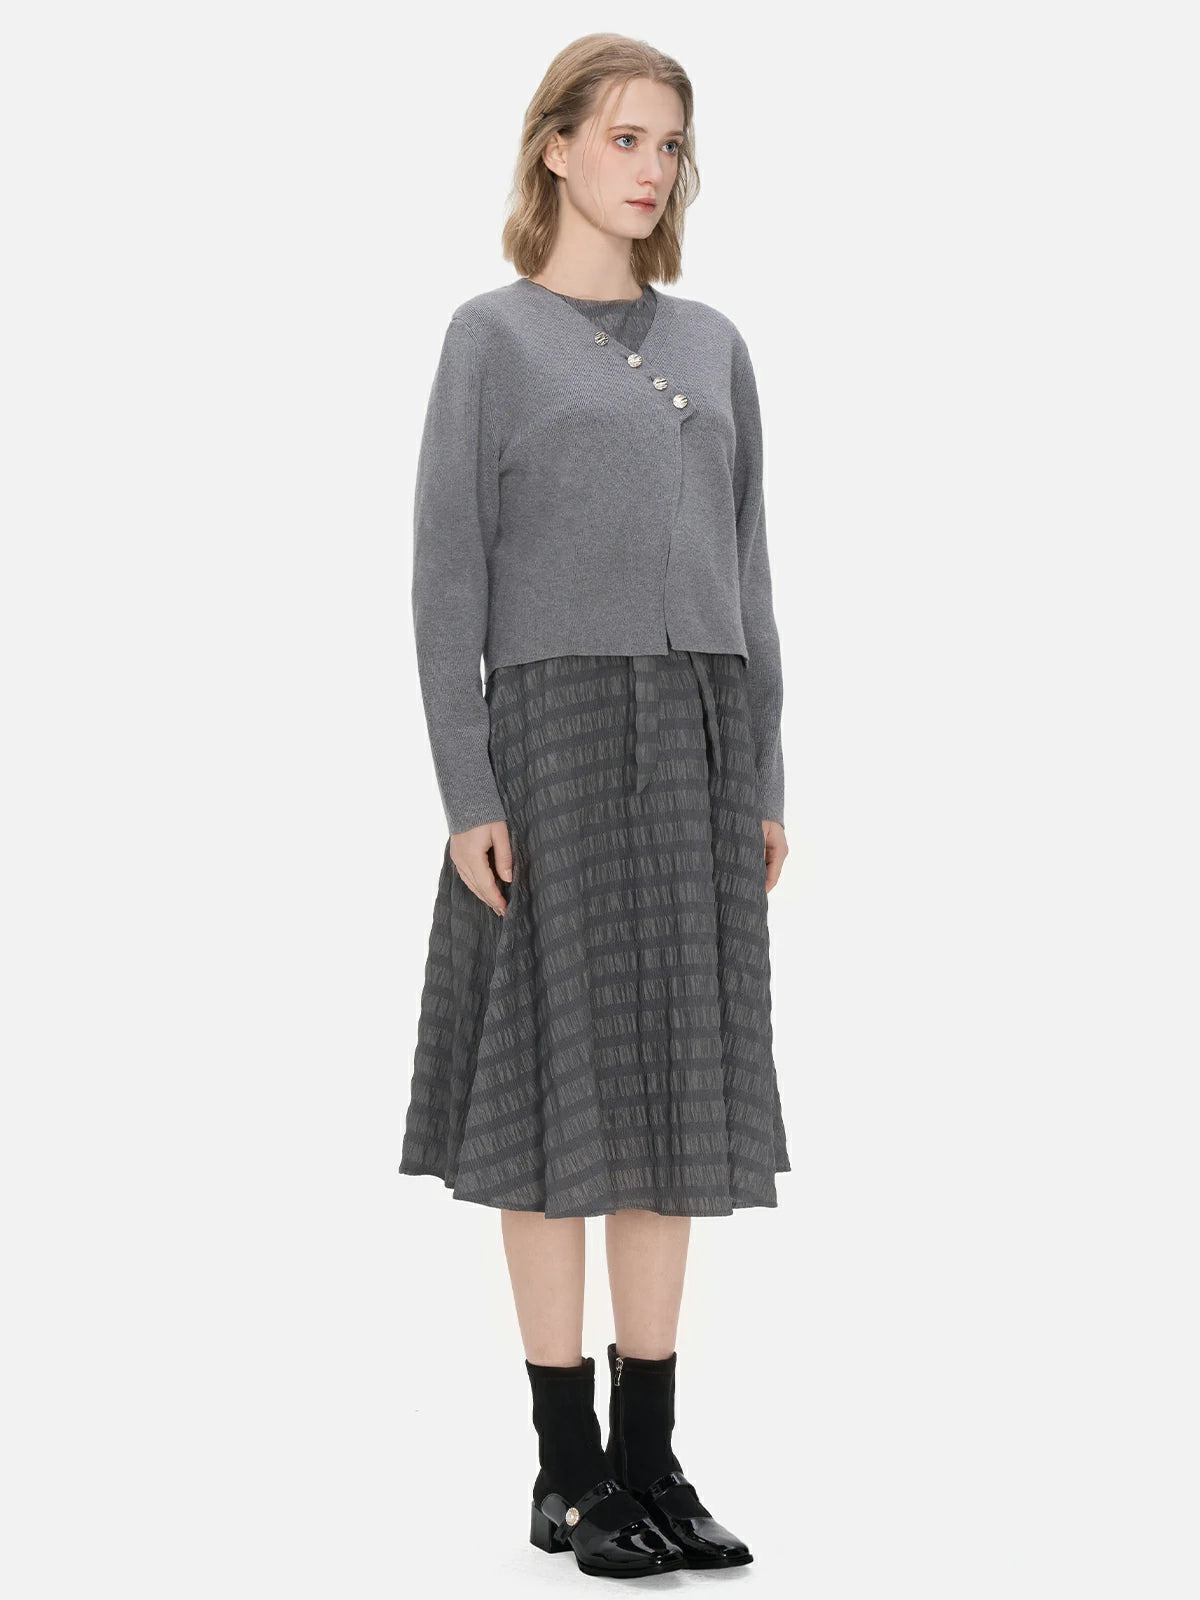 Embrace versatility and elegance with this ensemble, combining an irregular buttoned cardigan and a sleeveless A-line dress with a textured stripe design, making it a unique and fashionable choice for various occasions.